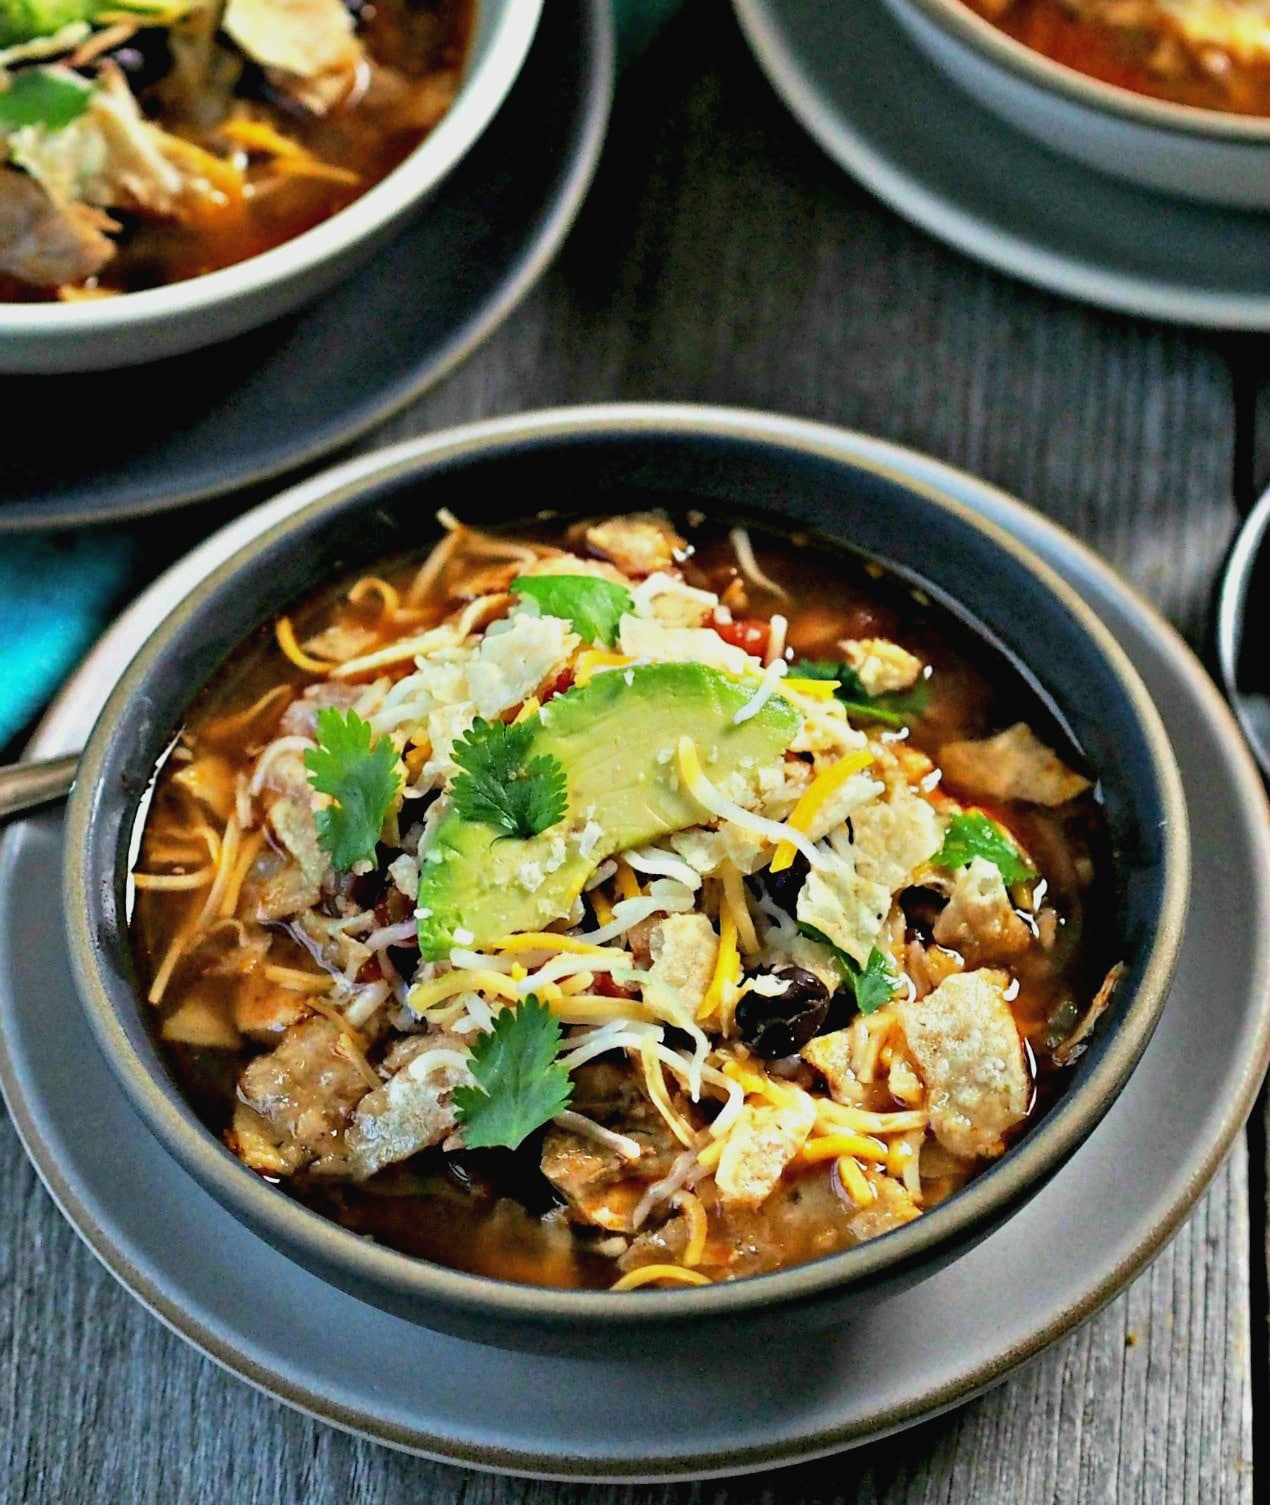 Chicken Tortilla Soup - chicken, beans, tomatoes and Mexican spices simmered together and topped with tortilla chips, cheese & sour cream. So delicious! Simply Sated